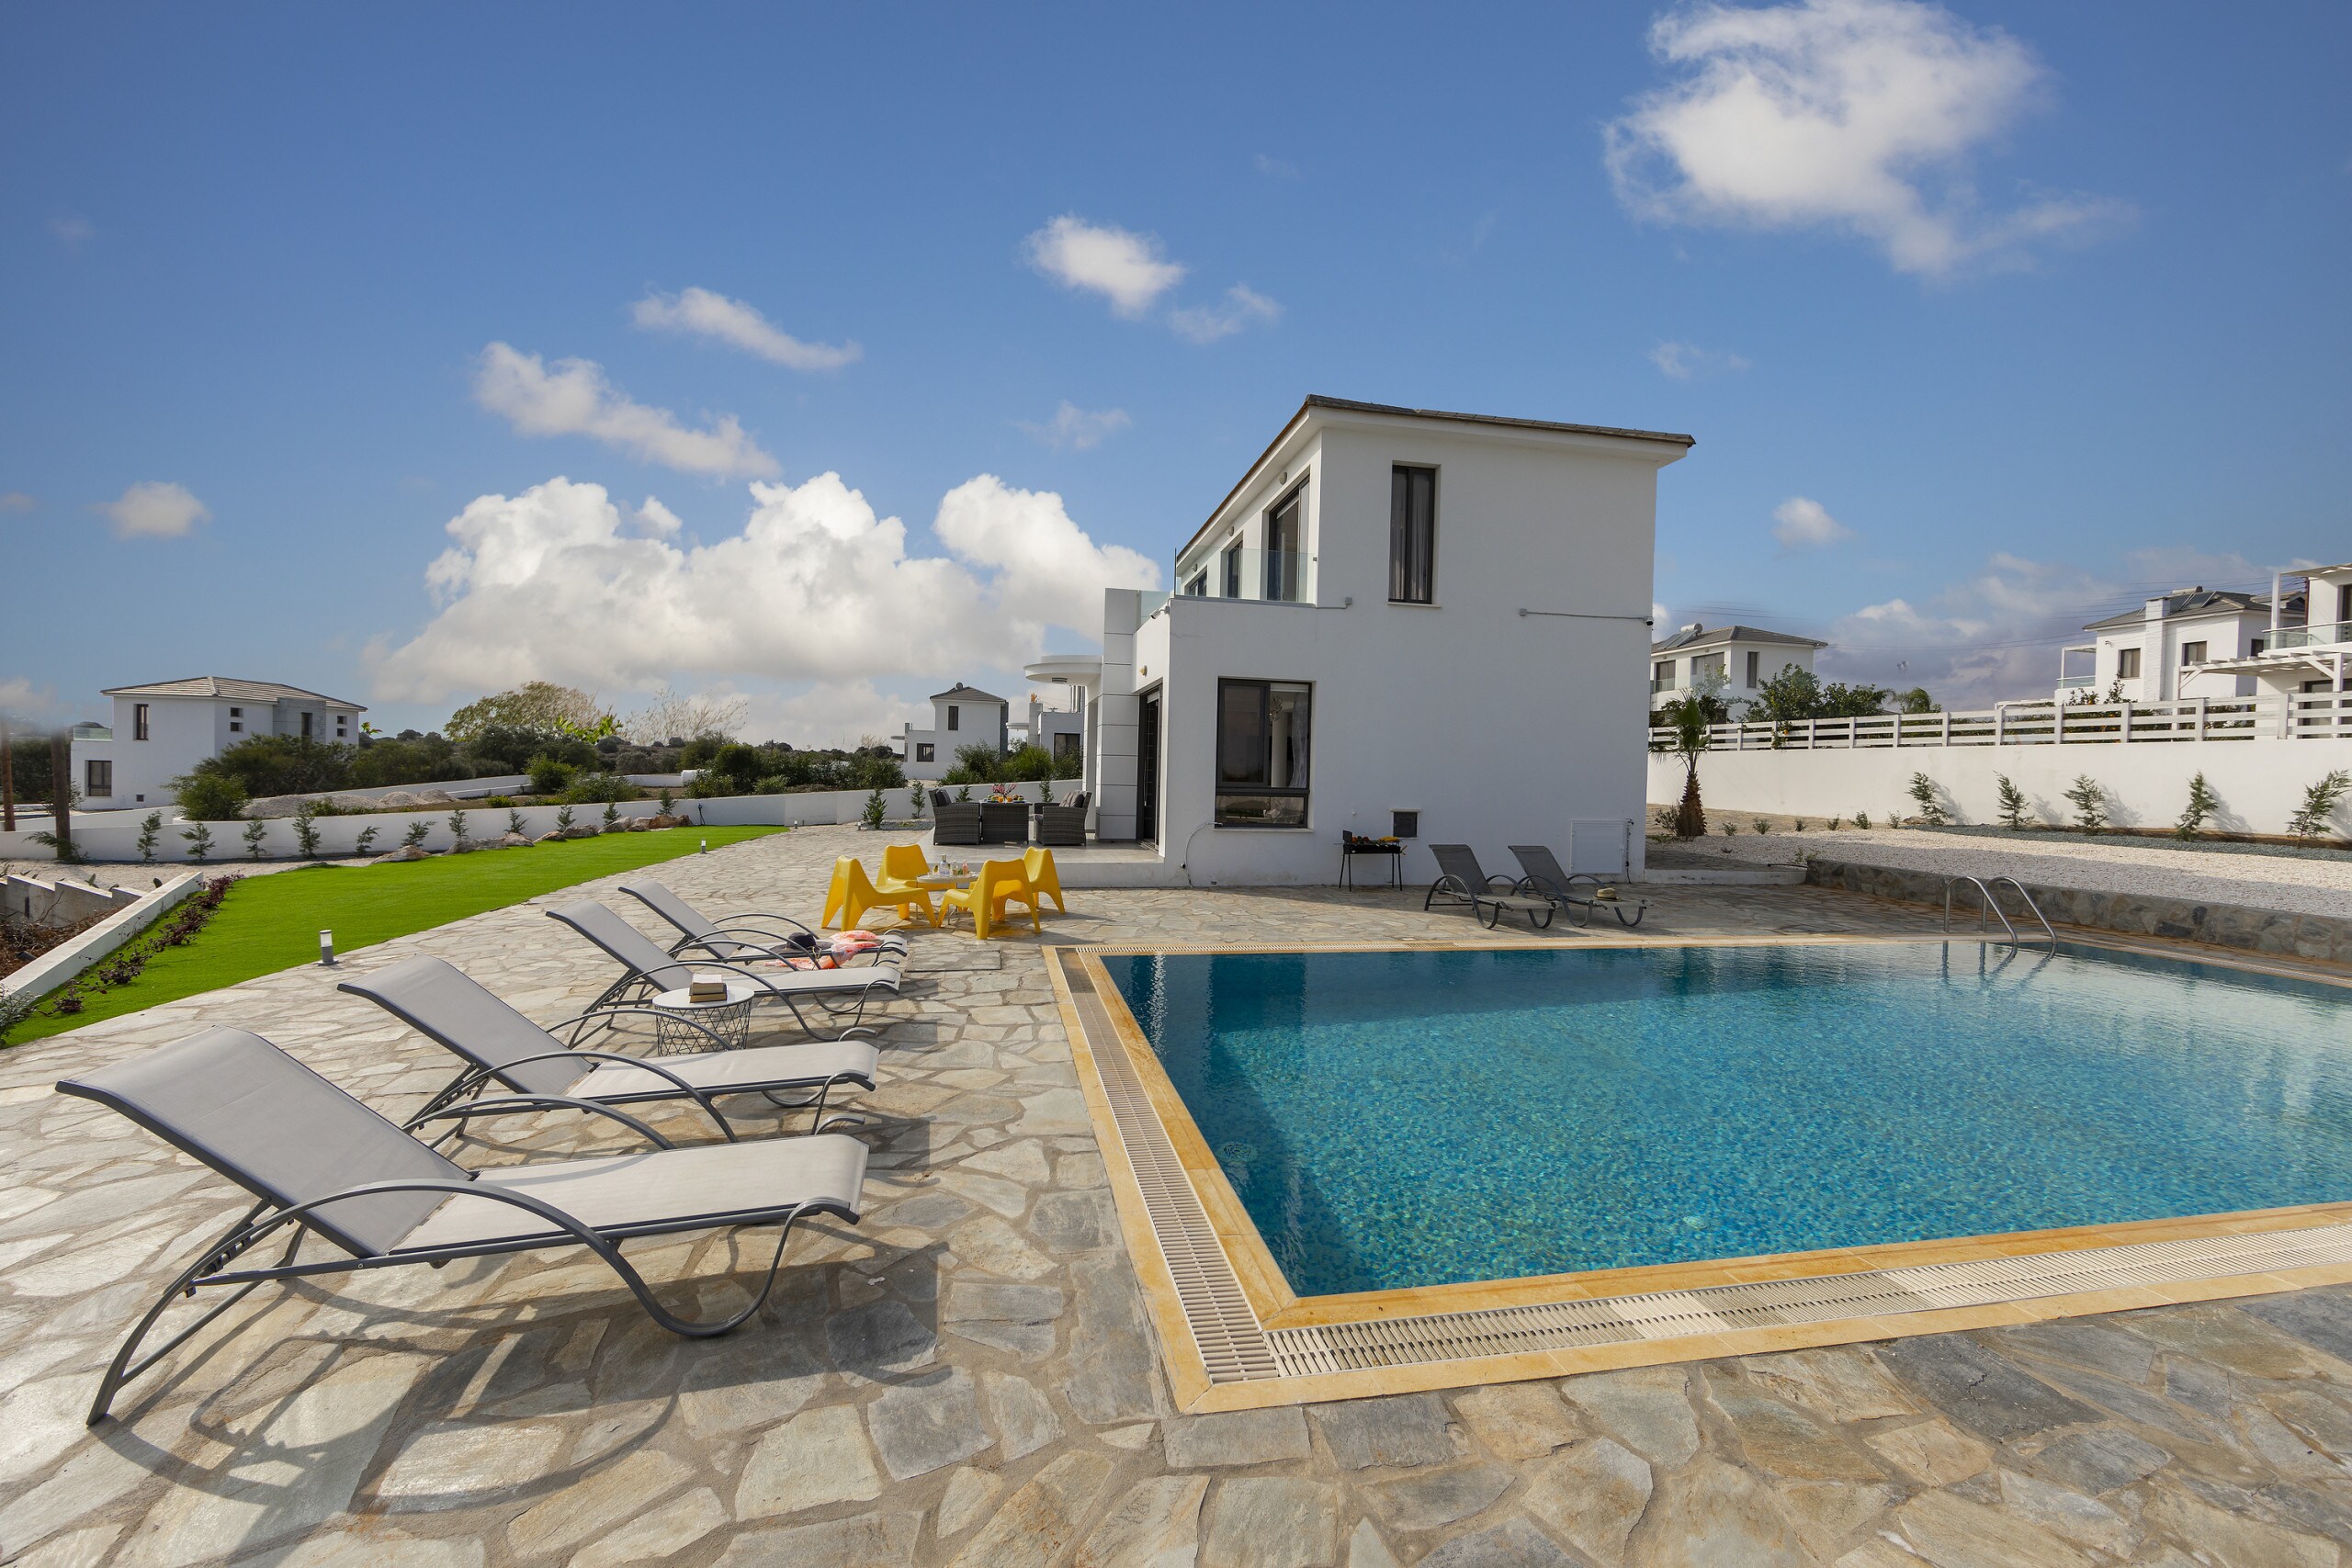 Property Image 1 - Grand Vacation Seafront Villa with Vast Pool and Garden